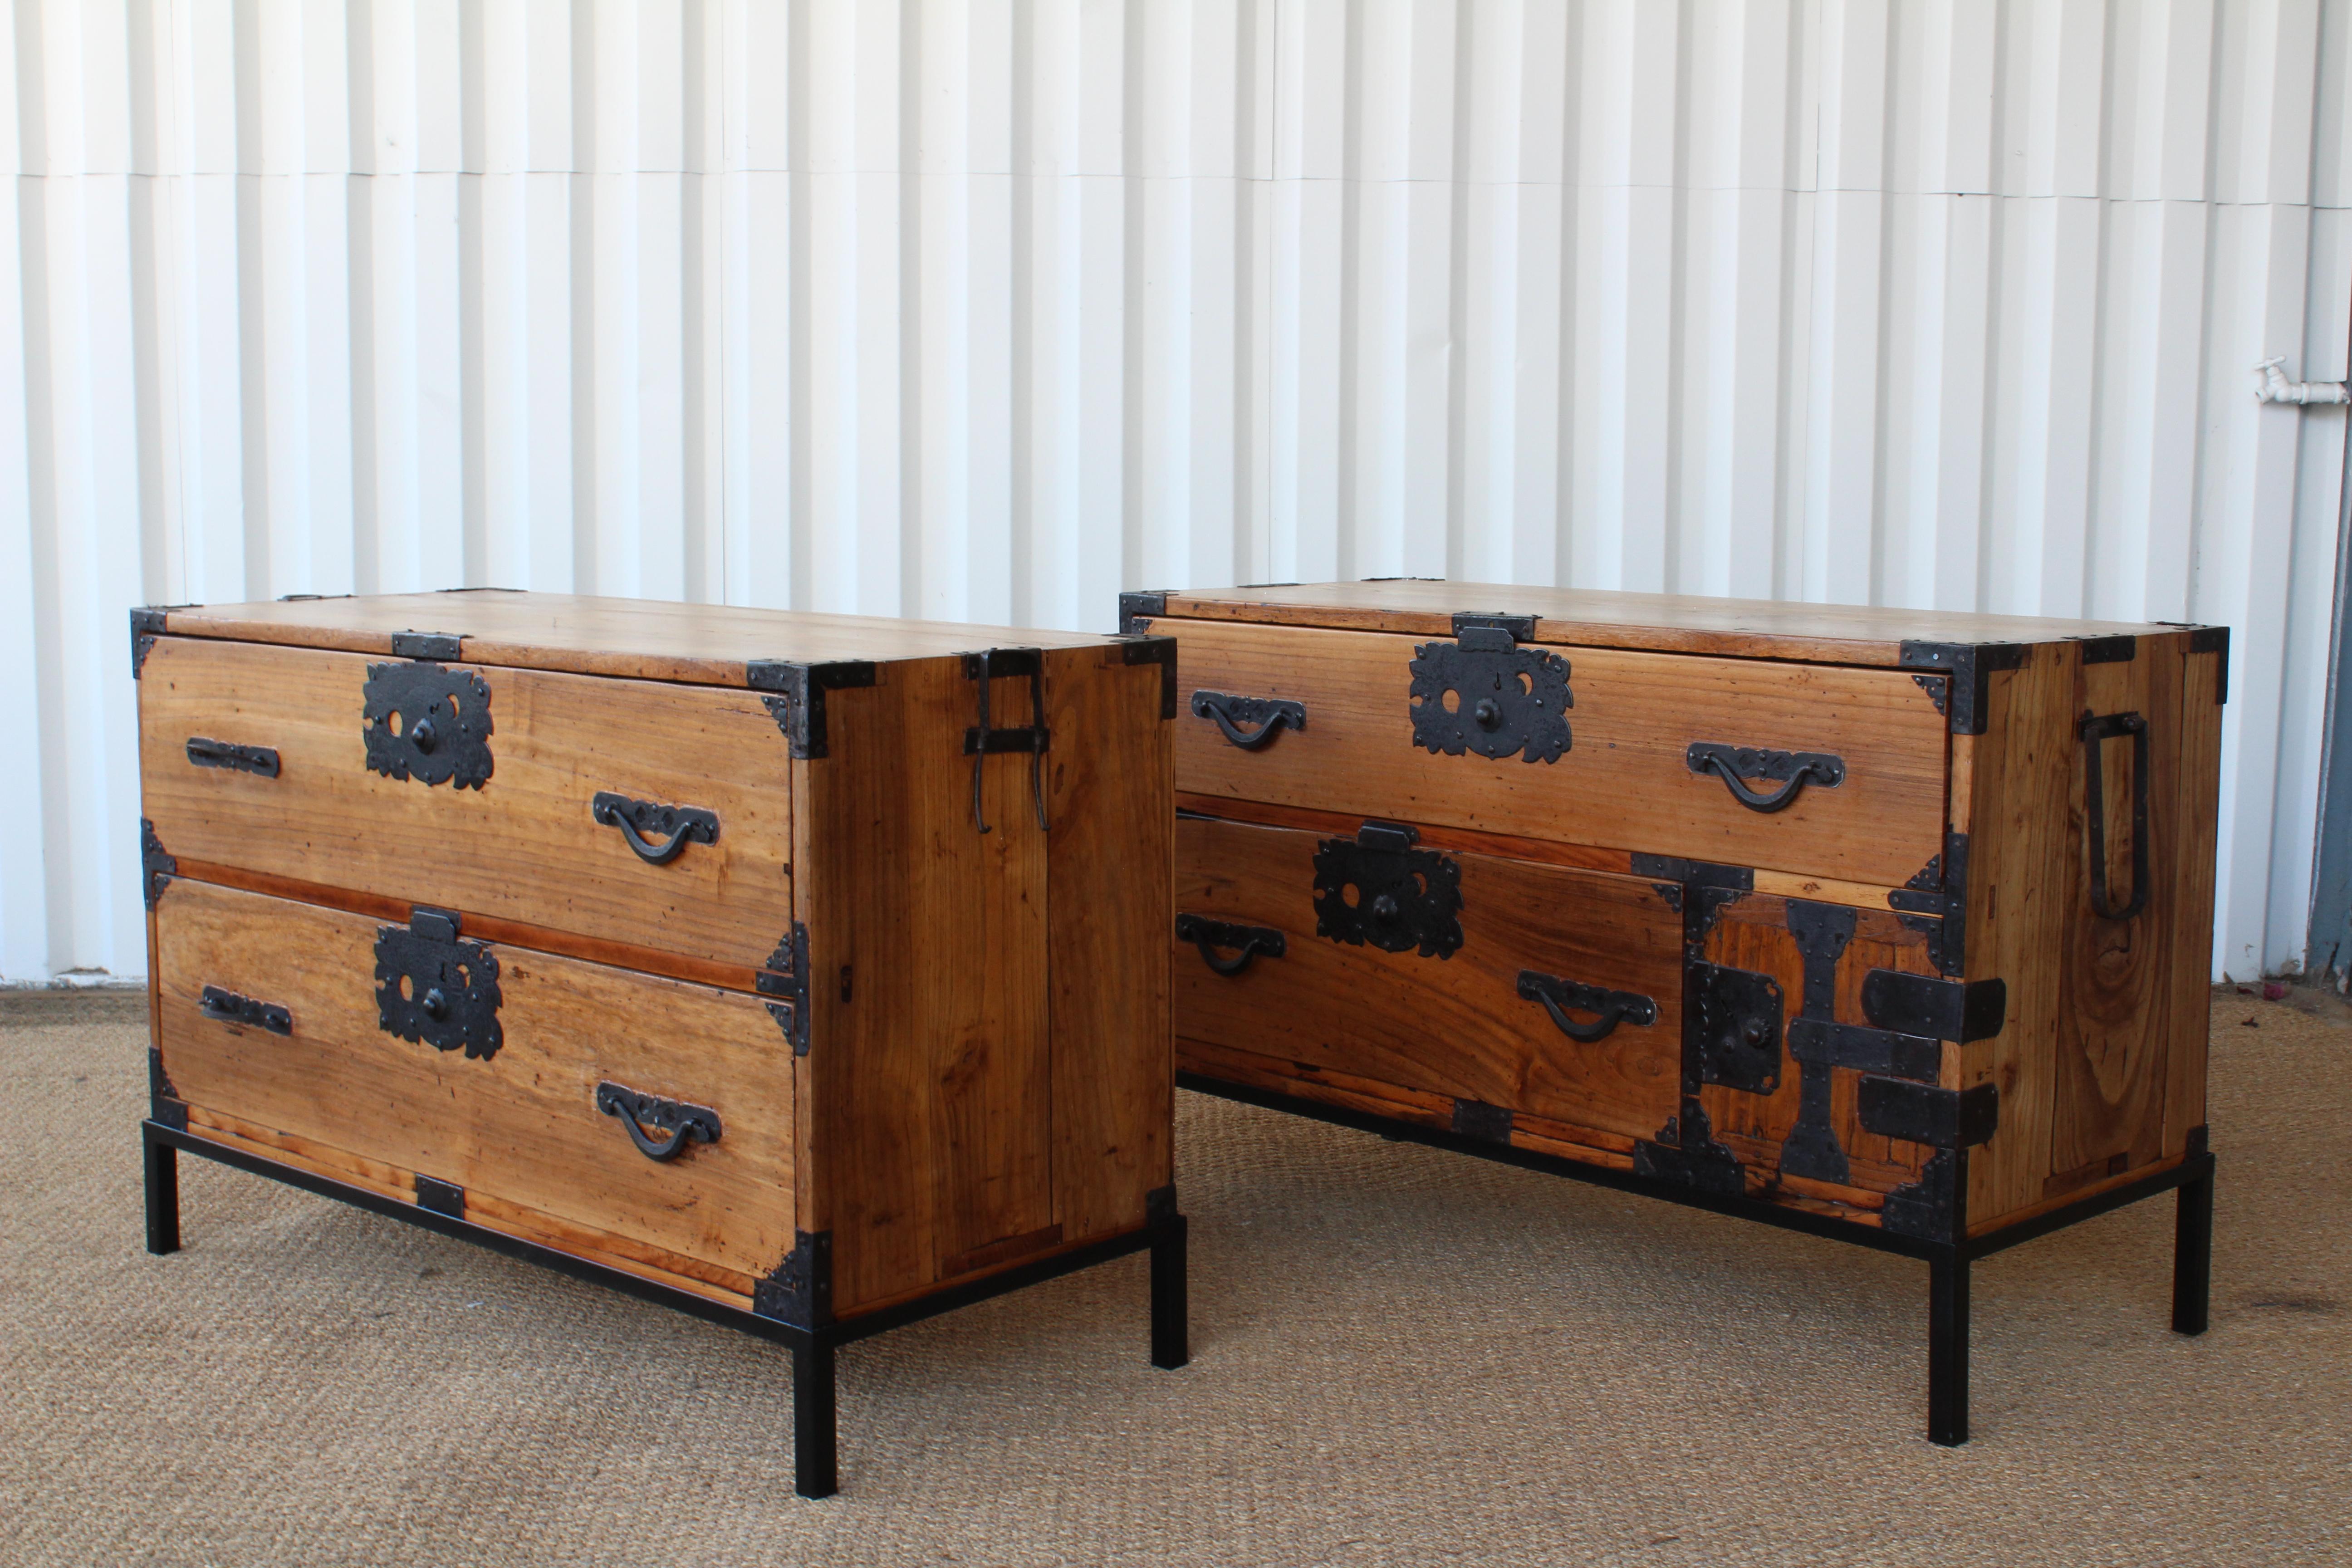 Pair of late 19th century tansu chests from Sendai Island, constructed in Japanese pine with iron accents. Newly refinished with custom metal bases. Iron hardware shows age appropriate wear. Sold as a pair.